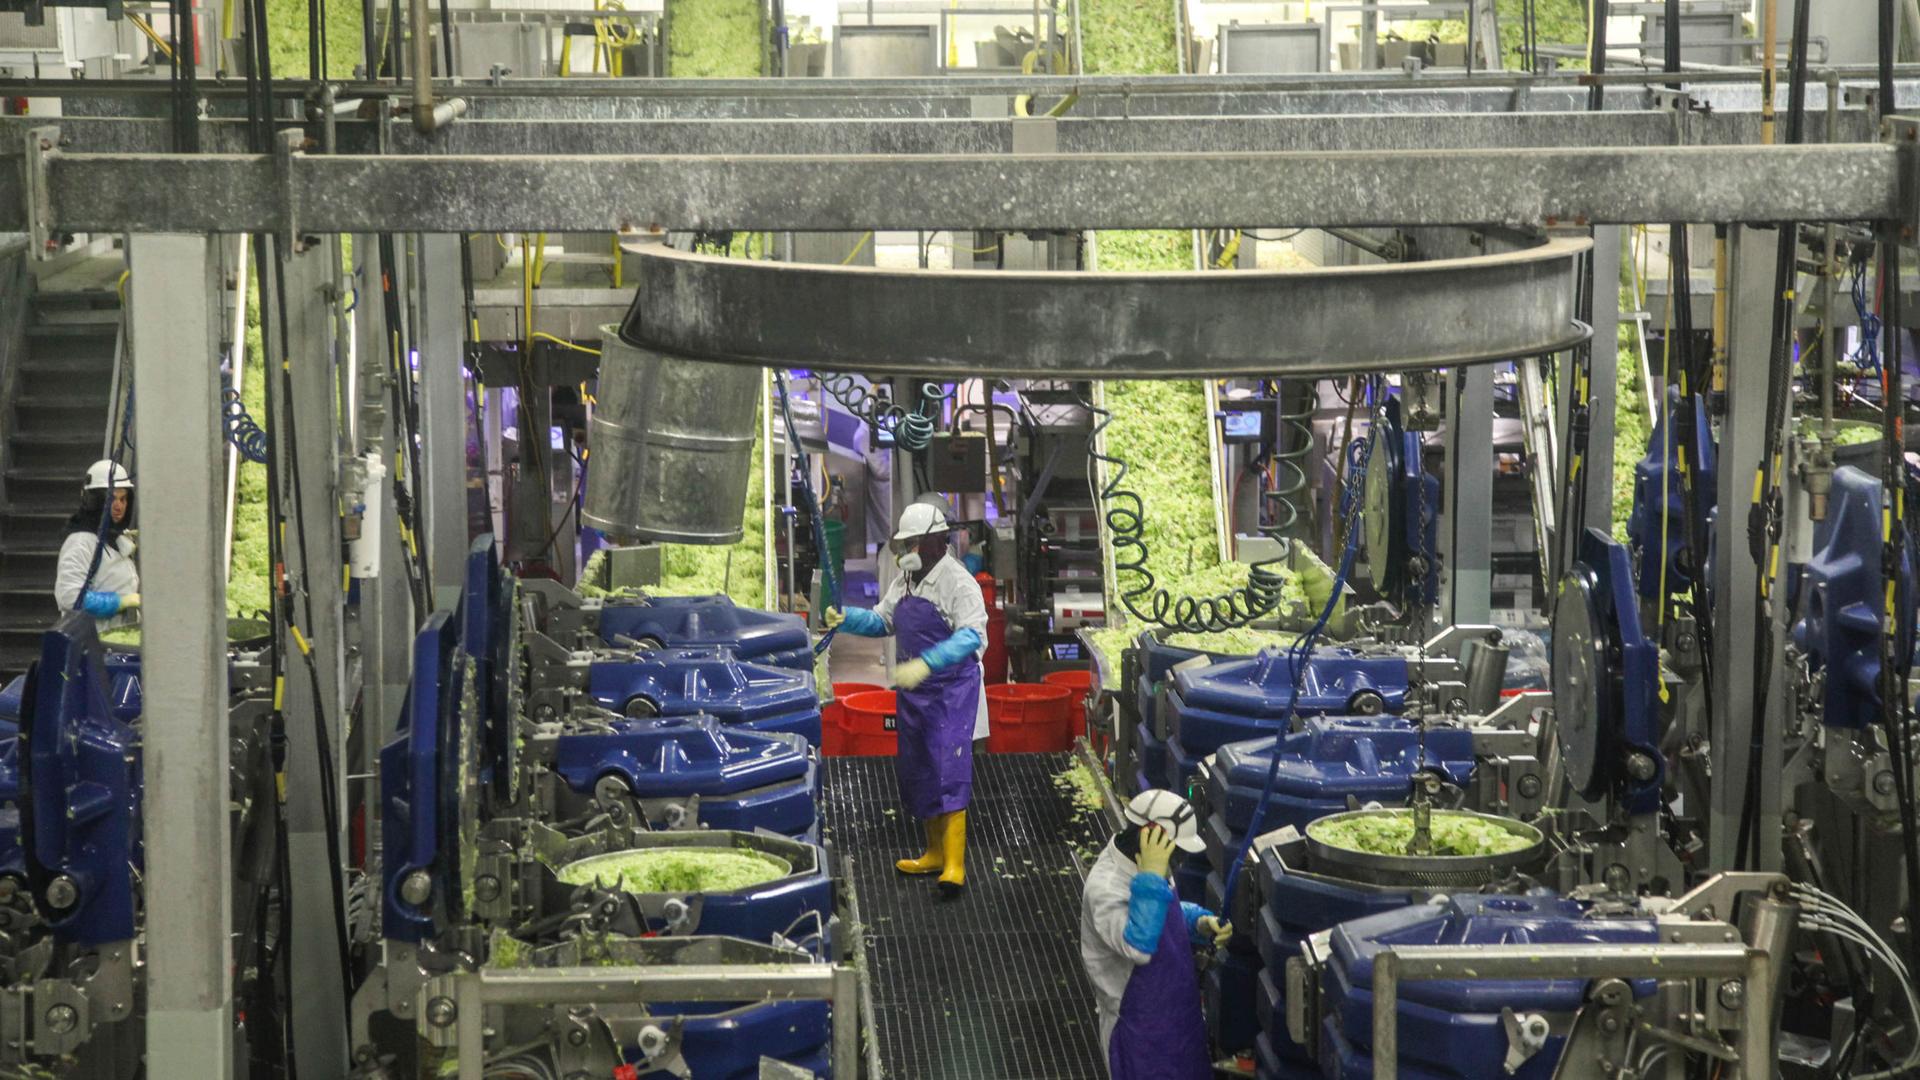 Workers wash and dry chopped lettuce at a Taylor Farms processing plant in Salinas, California on September 10, 2019. In recent years, the company has started incorporating automation in its facility. 